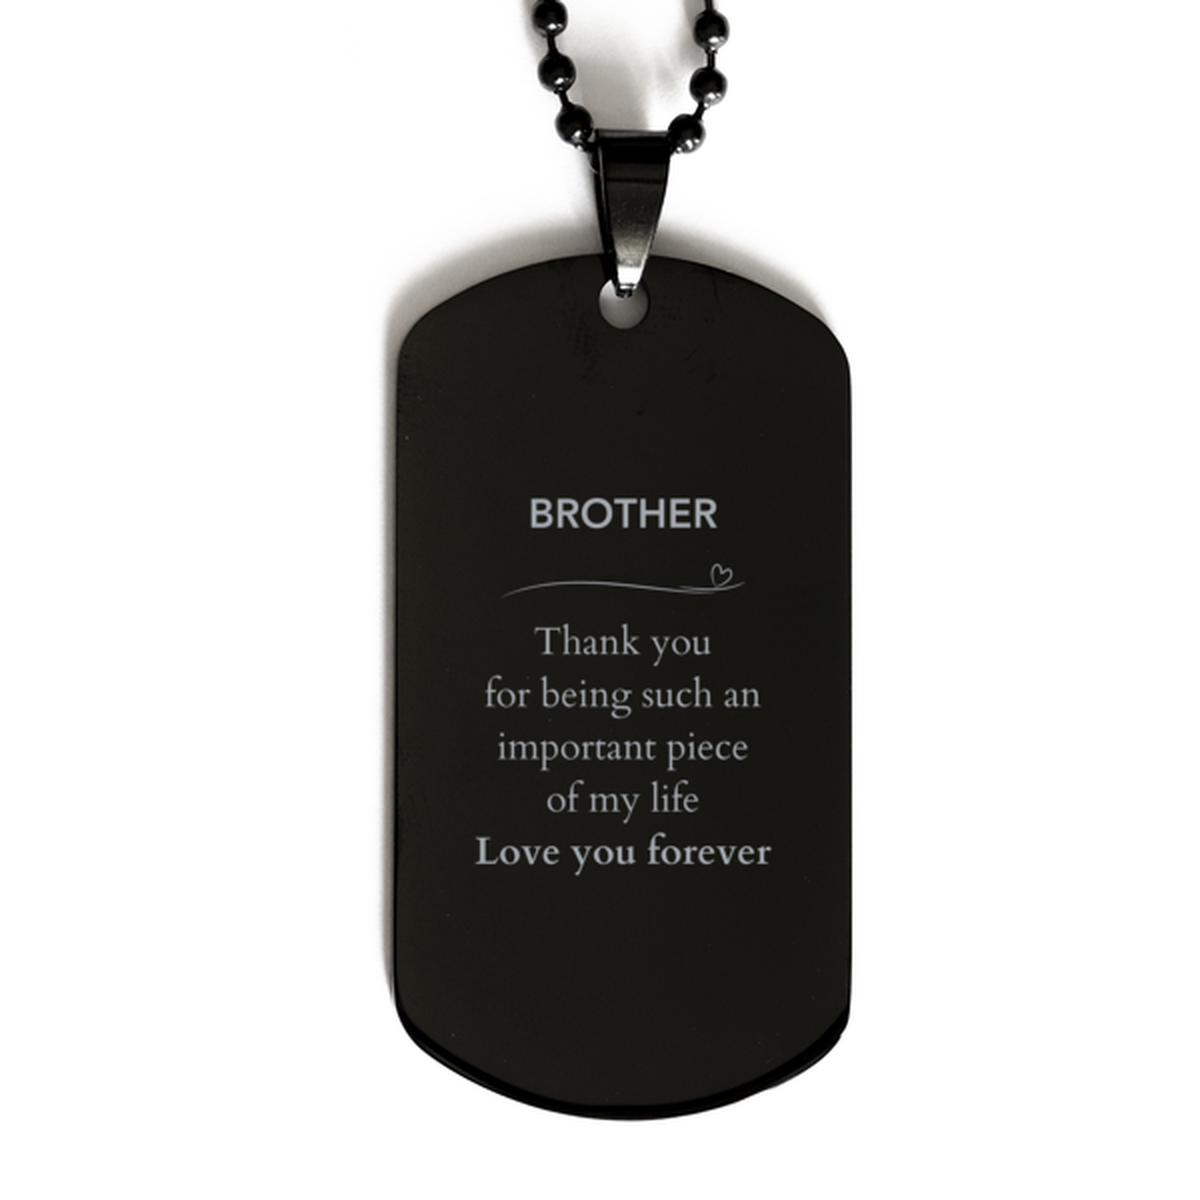 Appropriate Brother Black Dog Tag Epic Birthday Gifts for Brother Thank you for being such an important piece of my life Brother Christmas Mothers Fathers Day